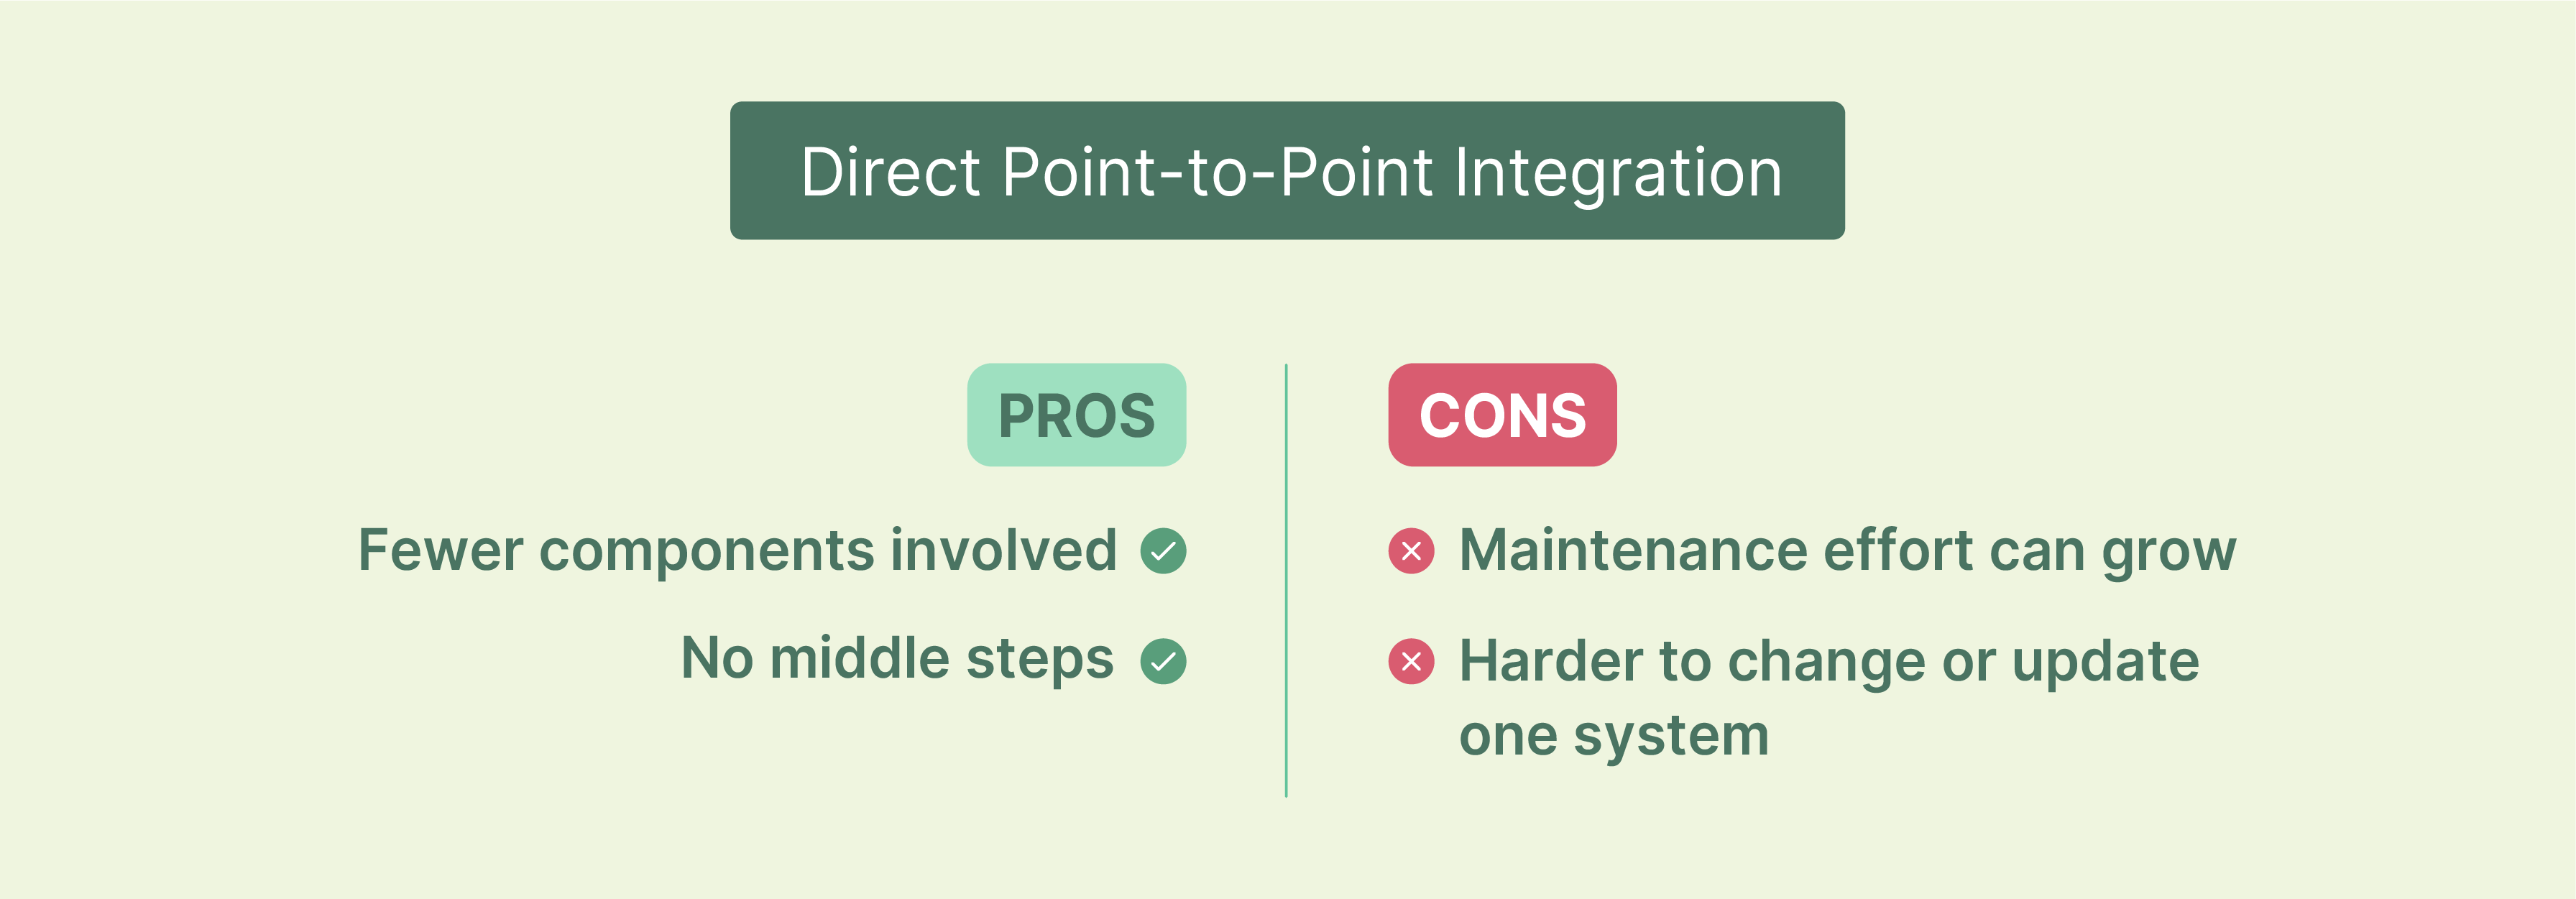 Pros and cons of Direct Point to point SAP S/4 HANA Magento Integration